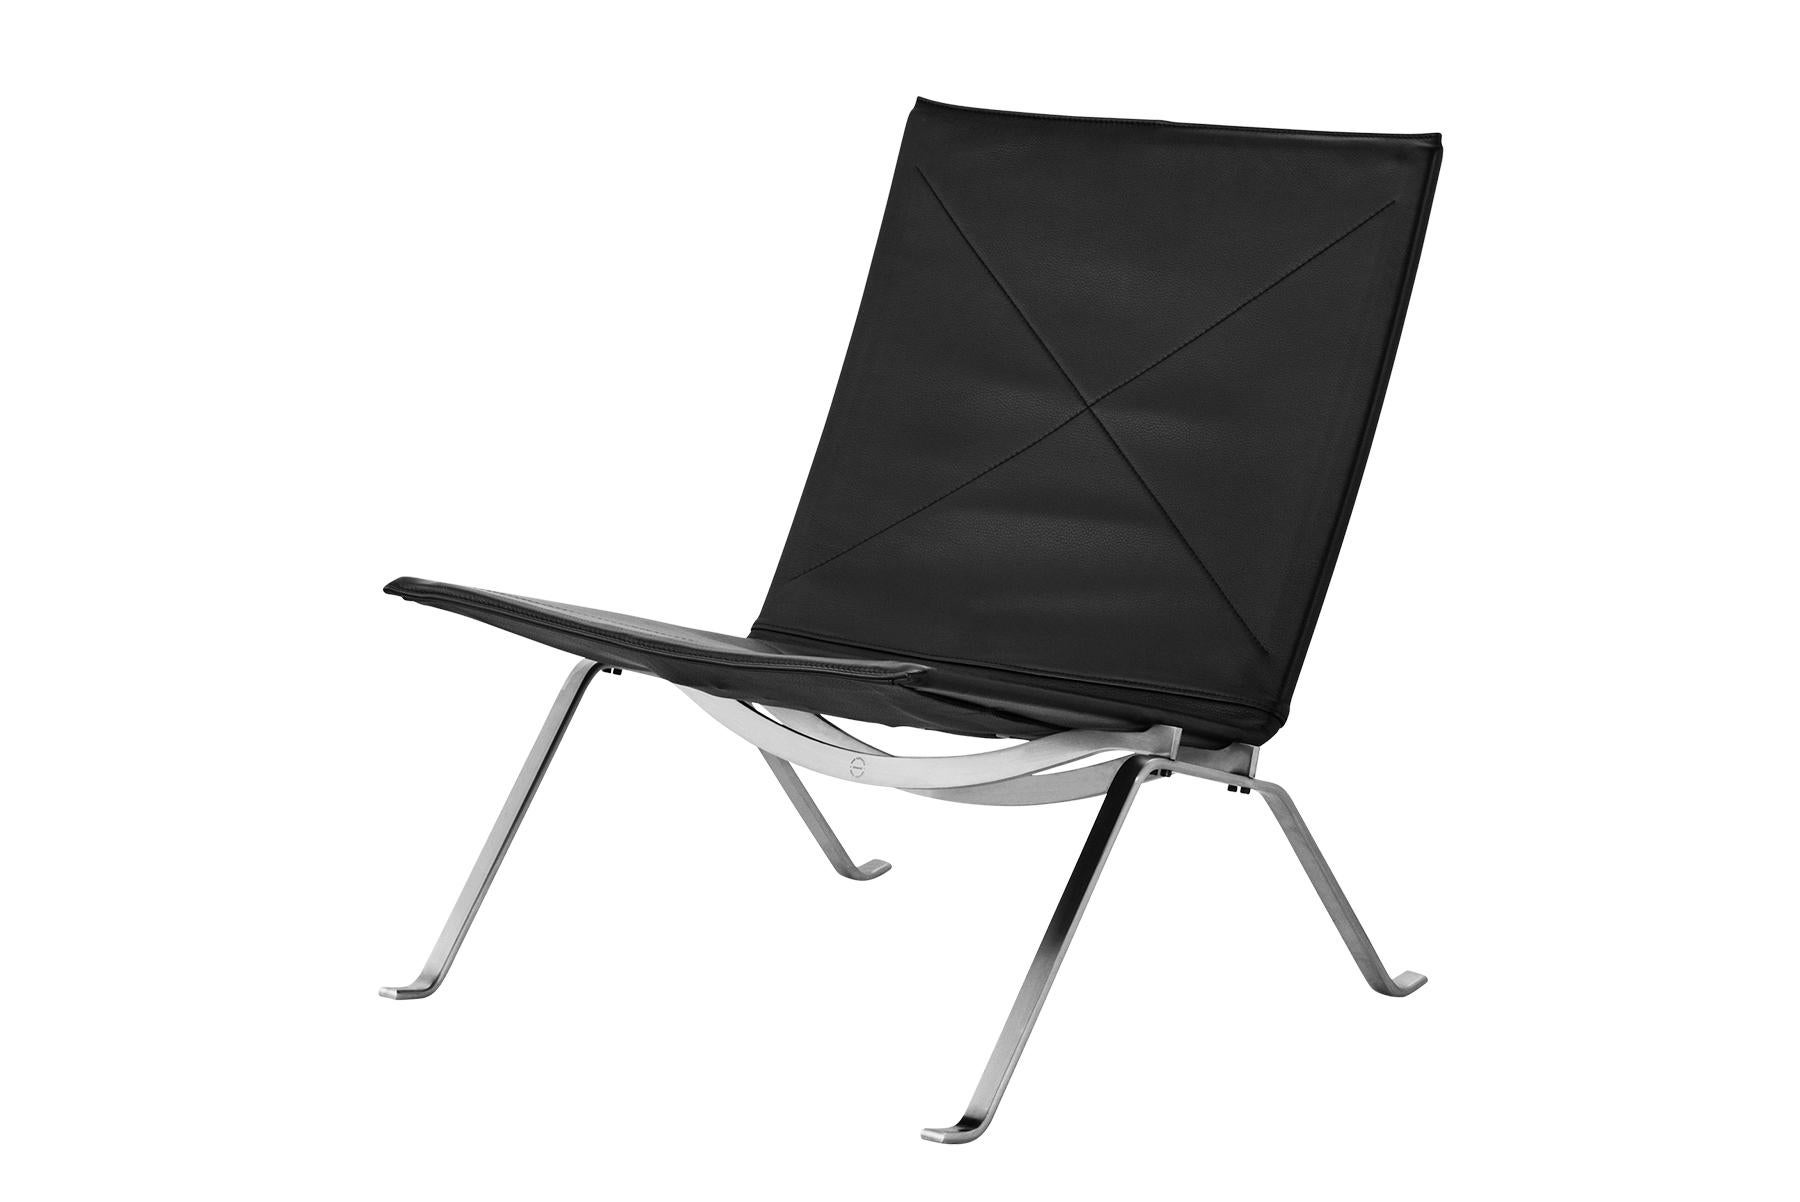 The discrete and elegant lounge chair PK22 epitomizes the work of Poul Kjærholm and his search for the ideal type-form and industrial dimension, which was always present in his work. The profile of the steel frame structure originates from his